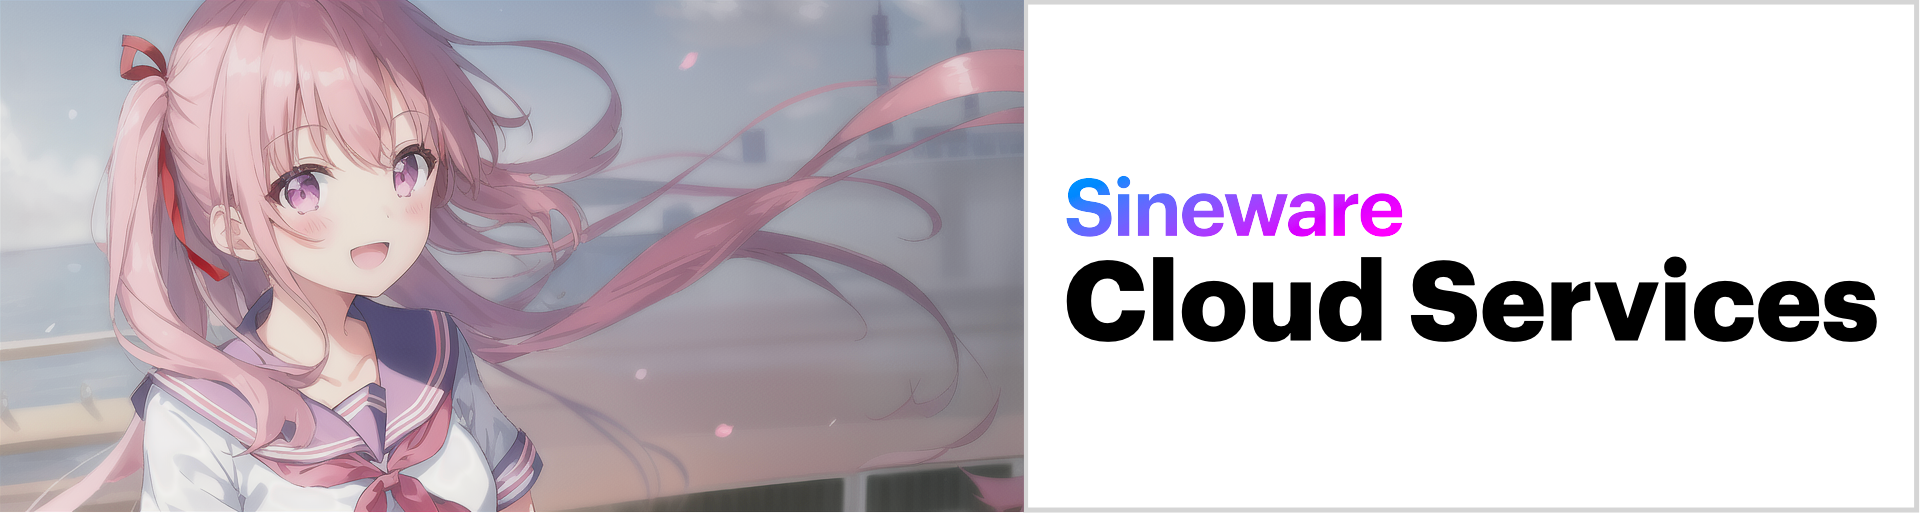 Sineware Cloud Services Logo with Anime Girl